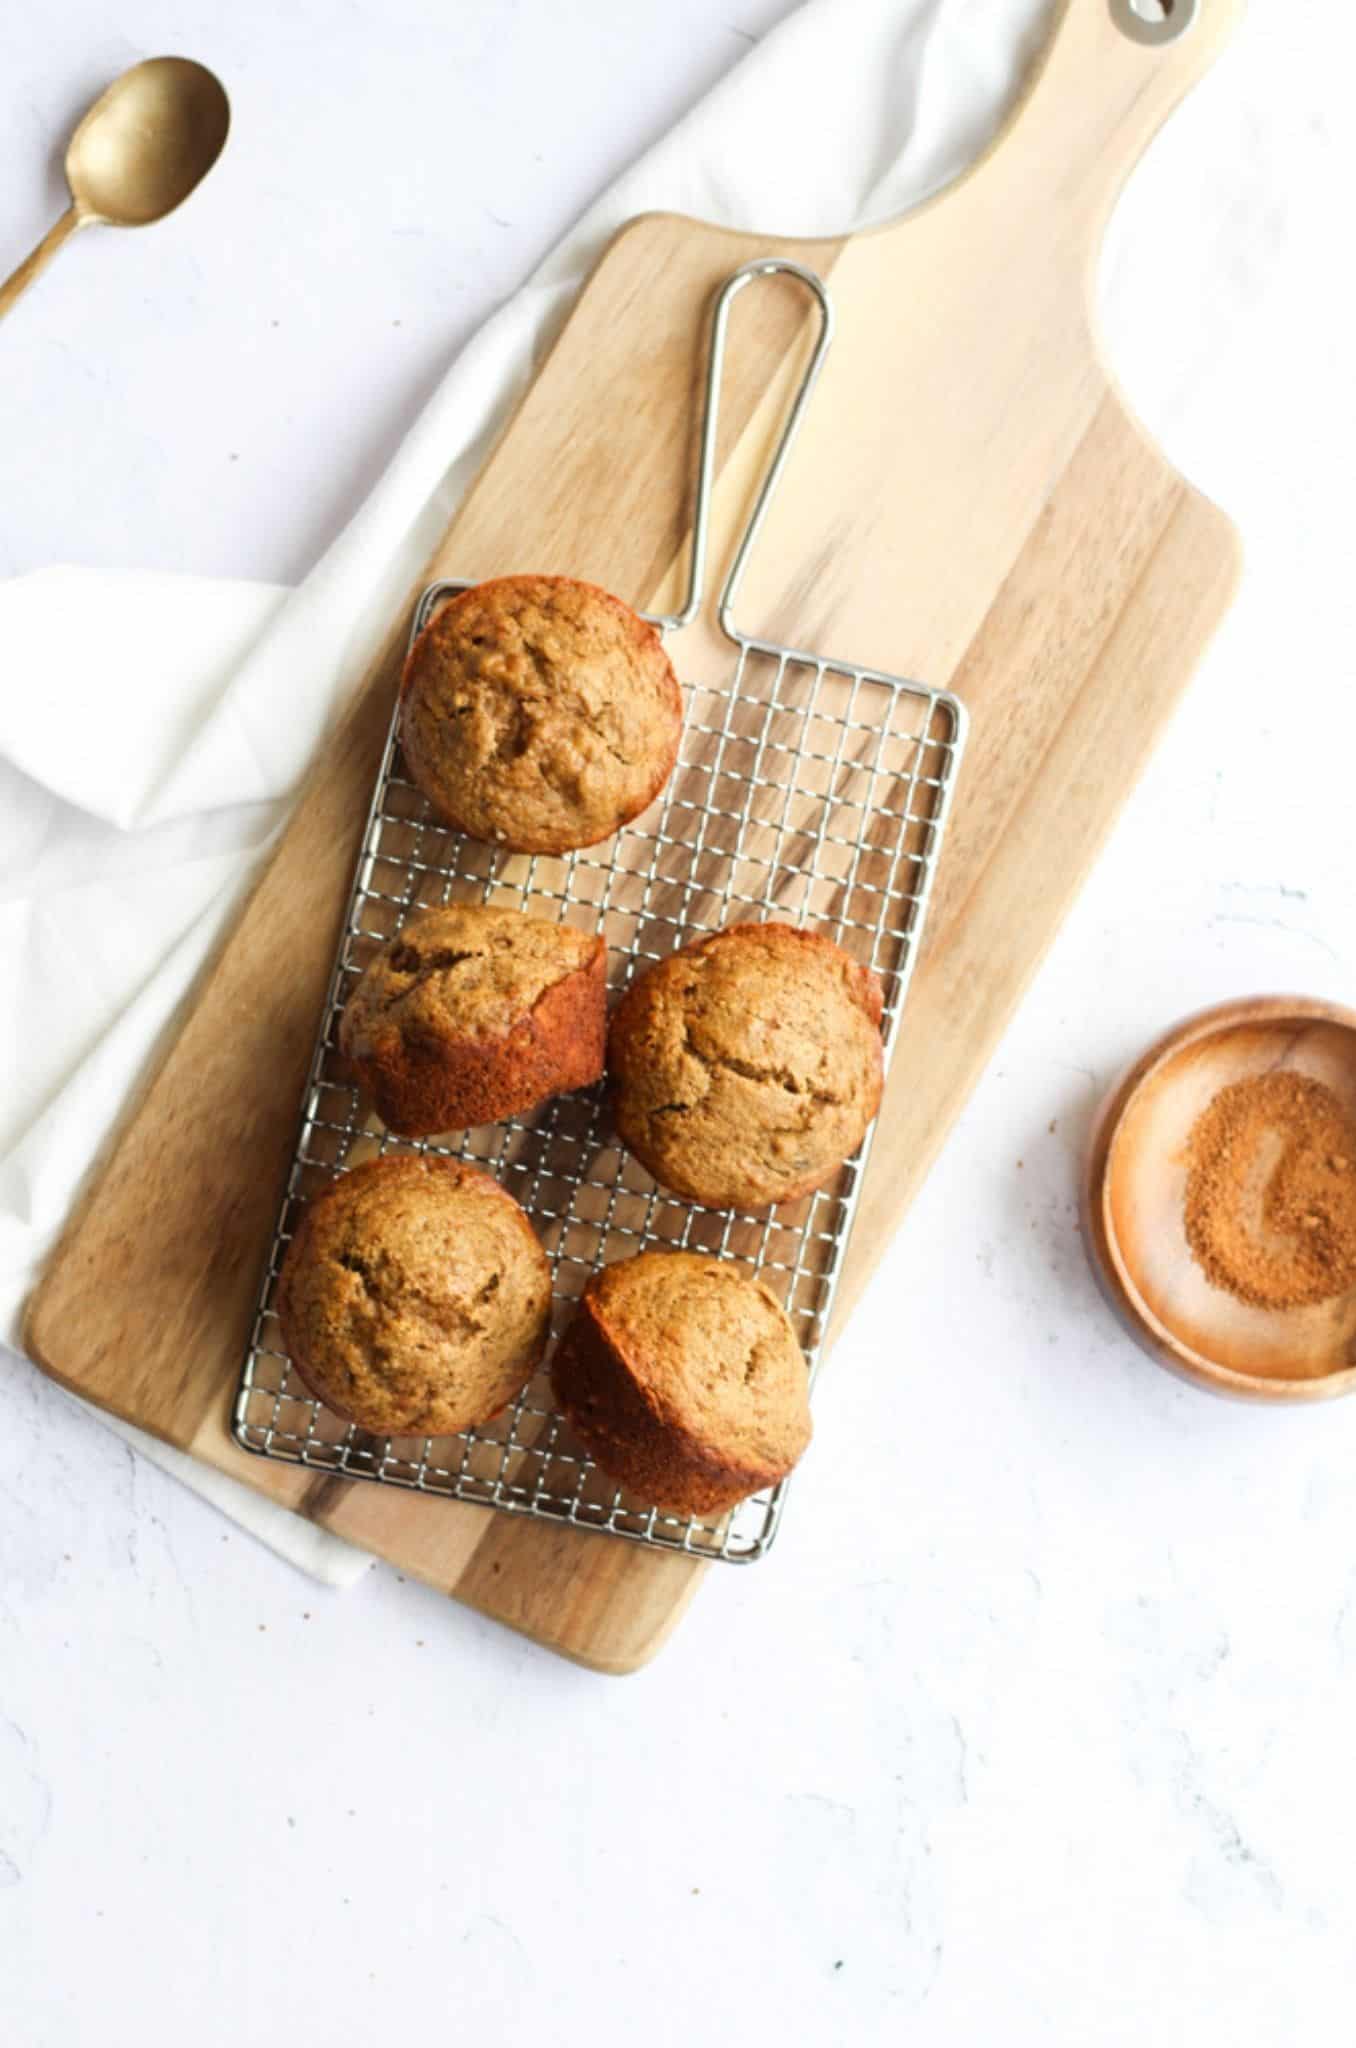 healthy 5 ingredient banana bread muffins on a cooling rack on top of a wooden cutting board on a white backdrop. A wooden bowl of coconut sugar is on the right hand side, and 2 of the muffins are turned on their sides